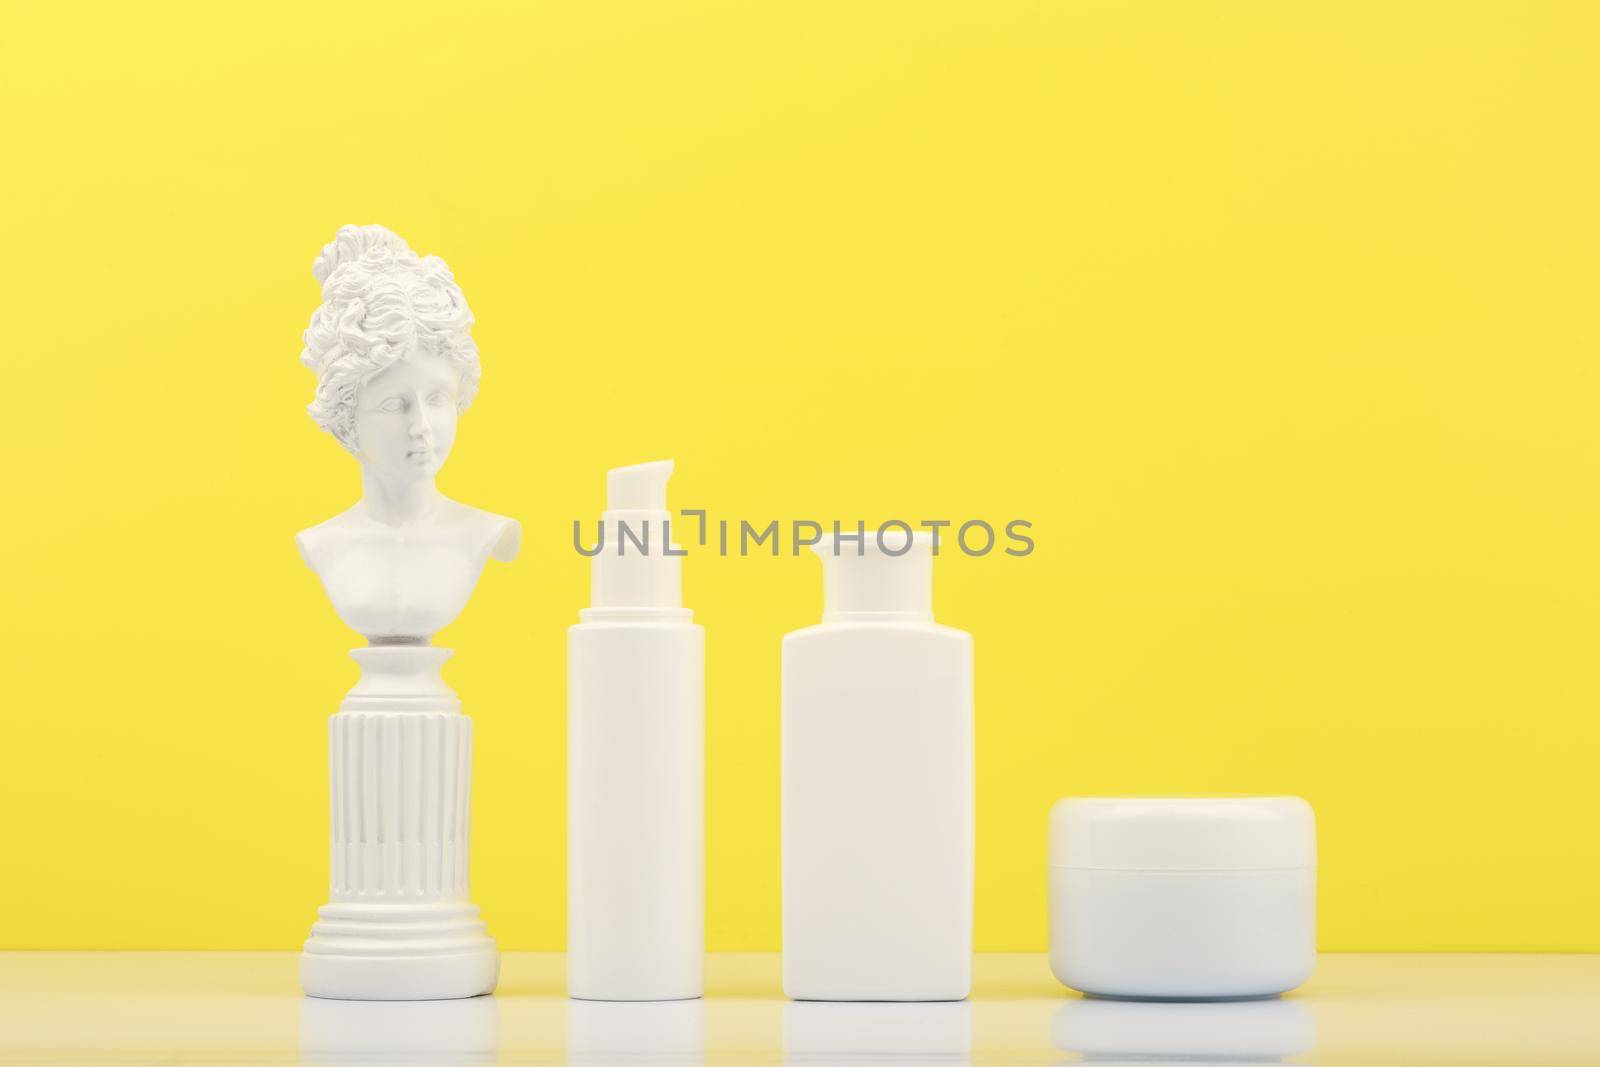 Set of beauty products for daily skin care on white table against bright yellow background with white gypsum statue.  by Senorina_Irina